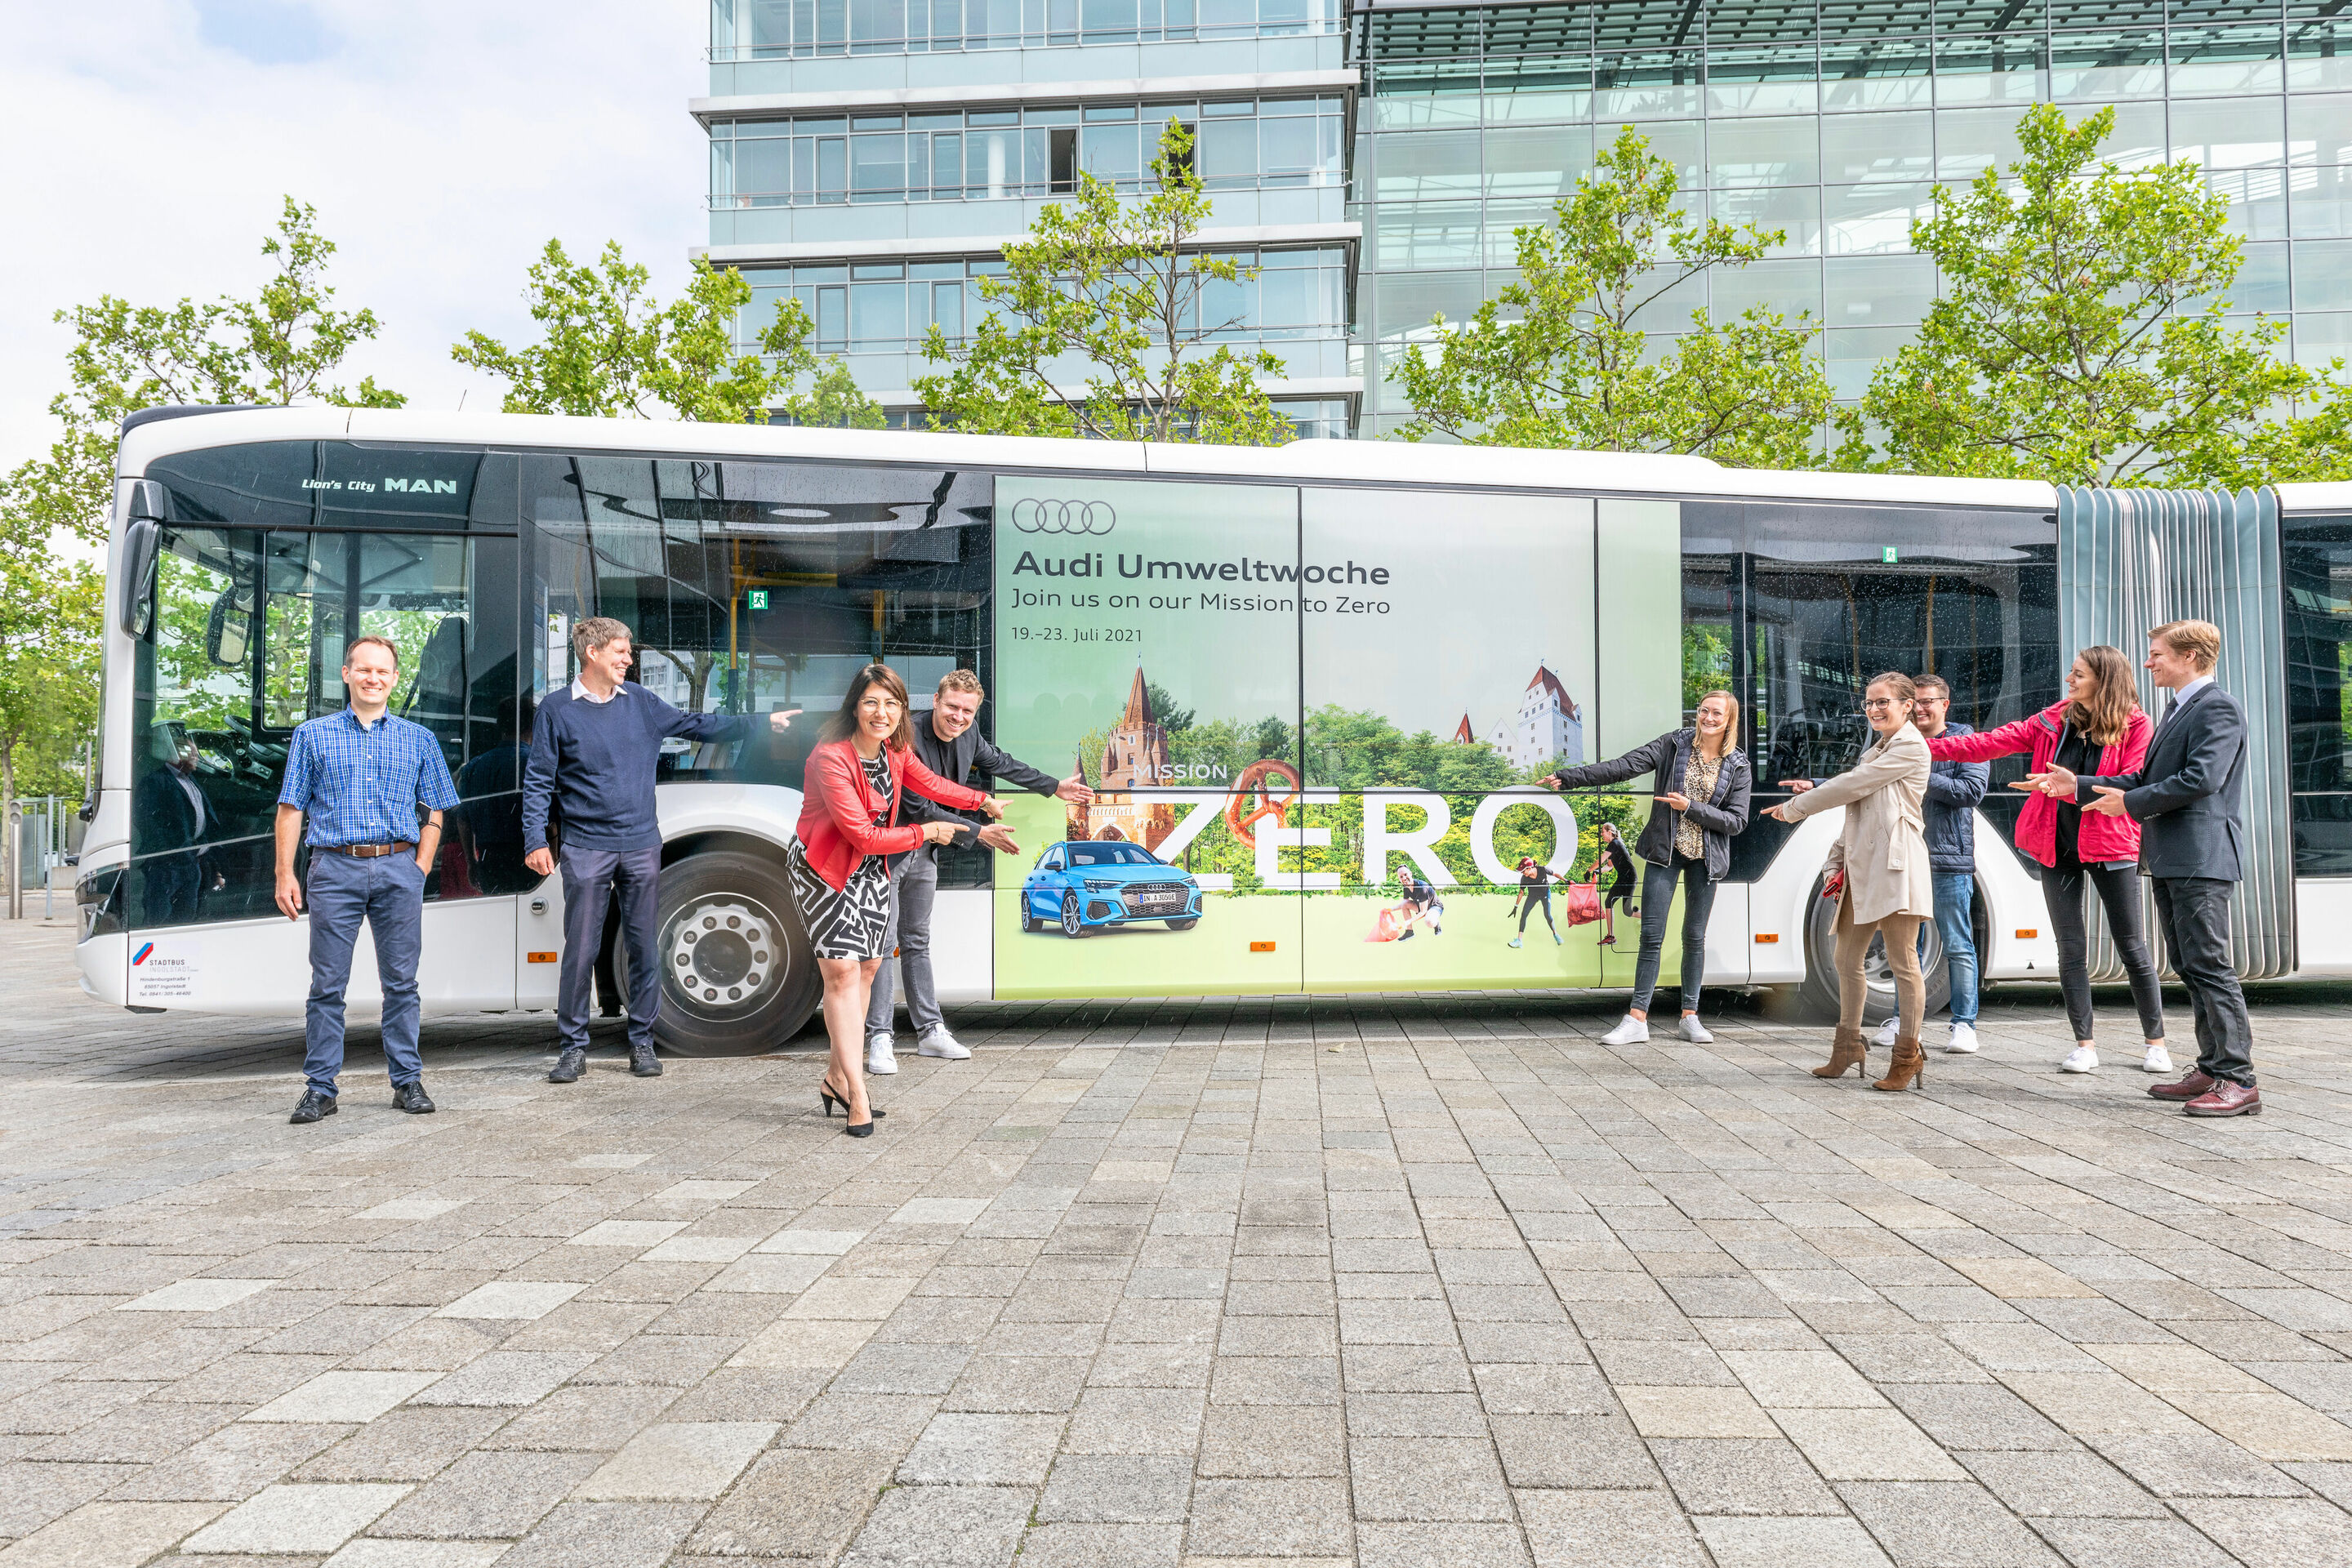 Under the motto “Join us on our mission to zero,” Audi is organizing “Audi Environment Week” from July 19 to 23.